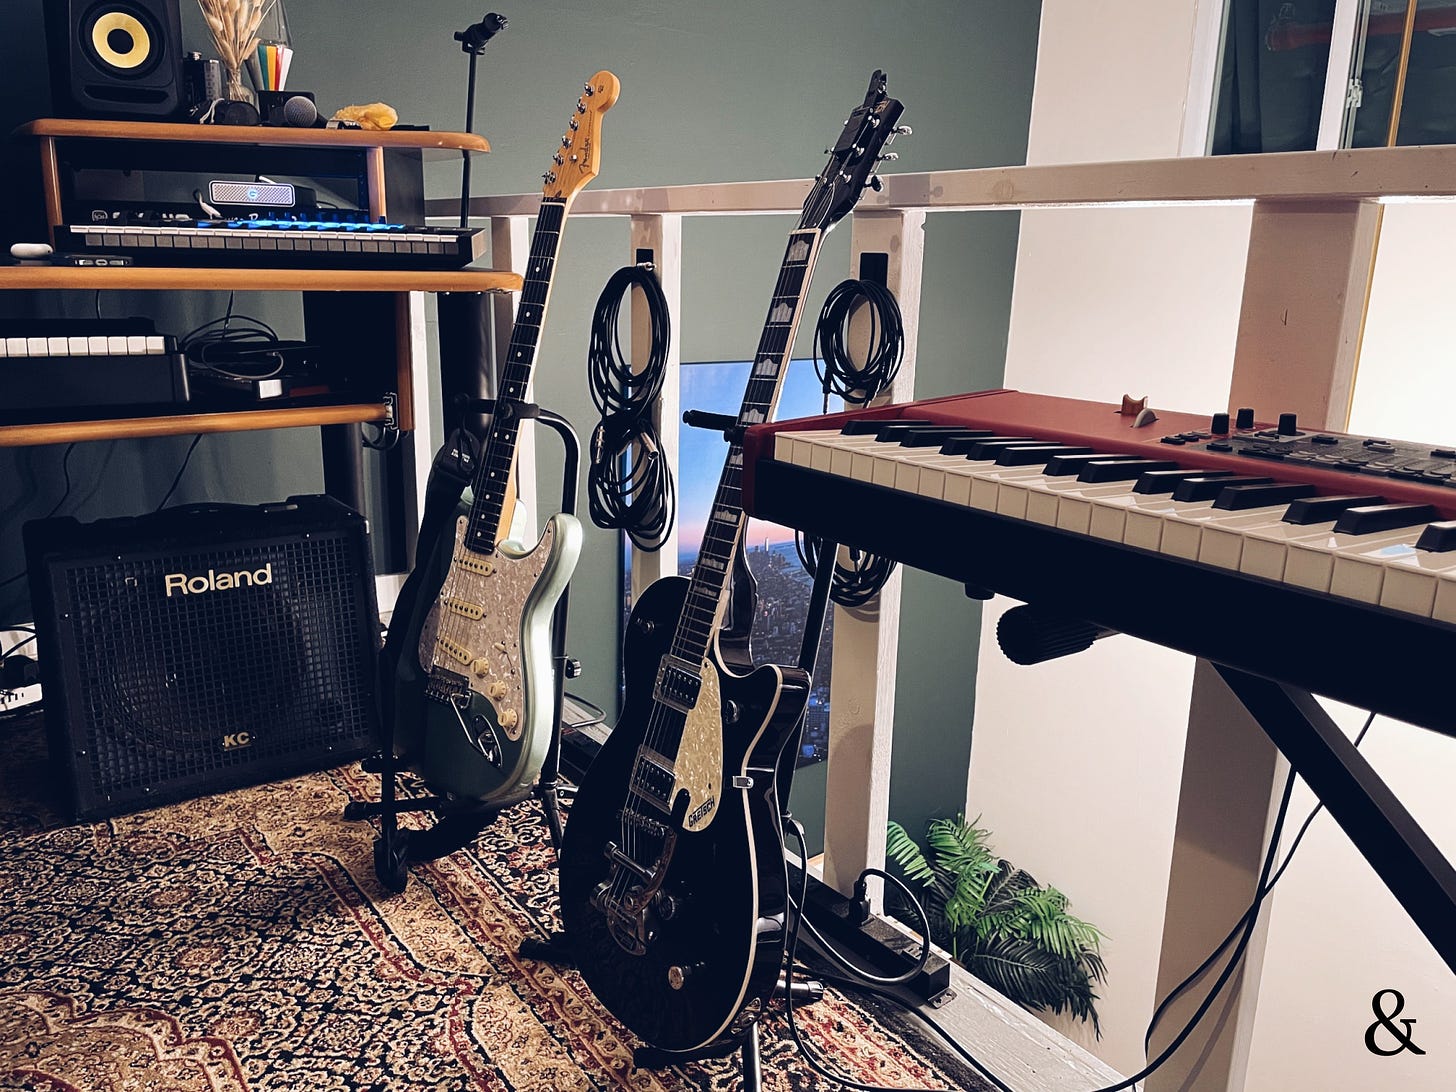 Two guitars, keyboards, and speakers.